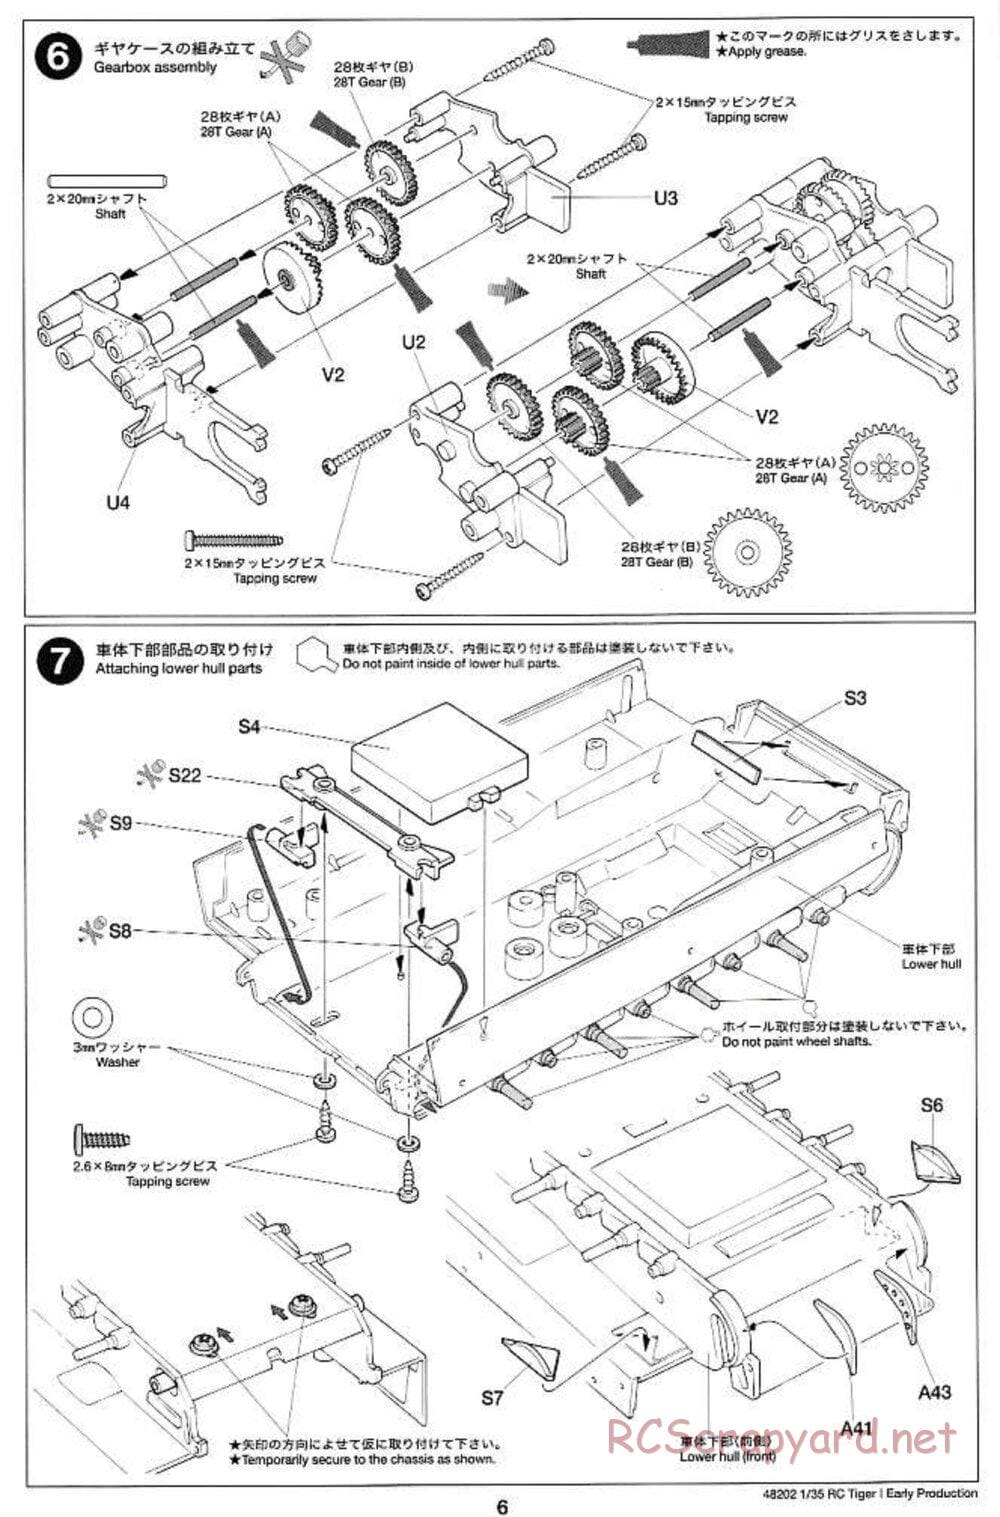 Tamiya - German Tiger 1 Early Production - 1/35 Scale Chassis - Manual - Page 6